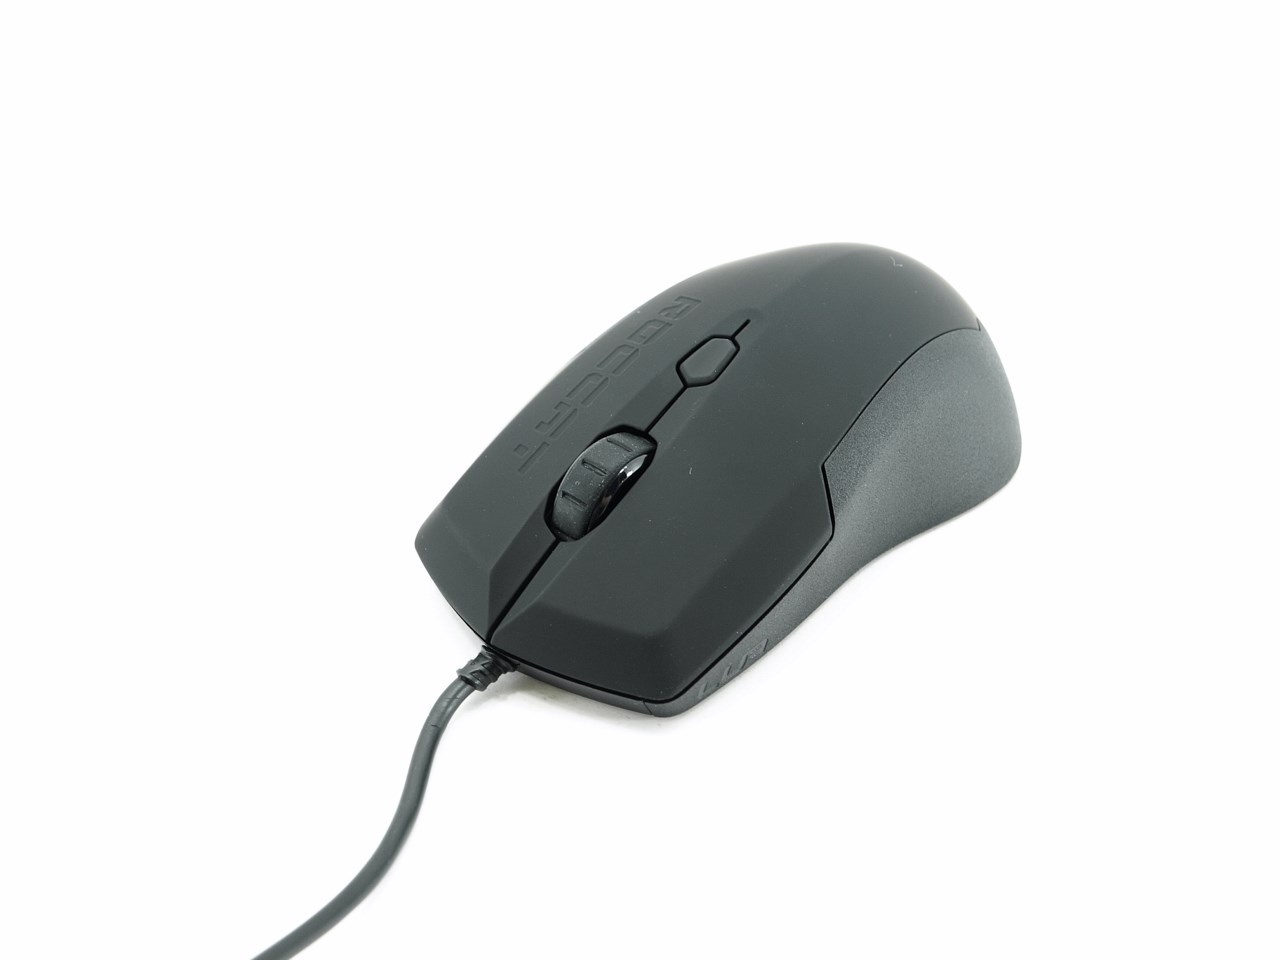 ROCCAT Lua Tri-Button USB Wired Gaming Mouse 